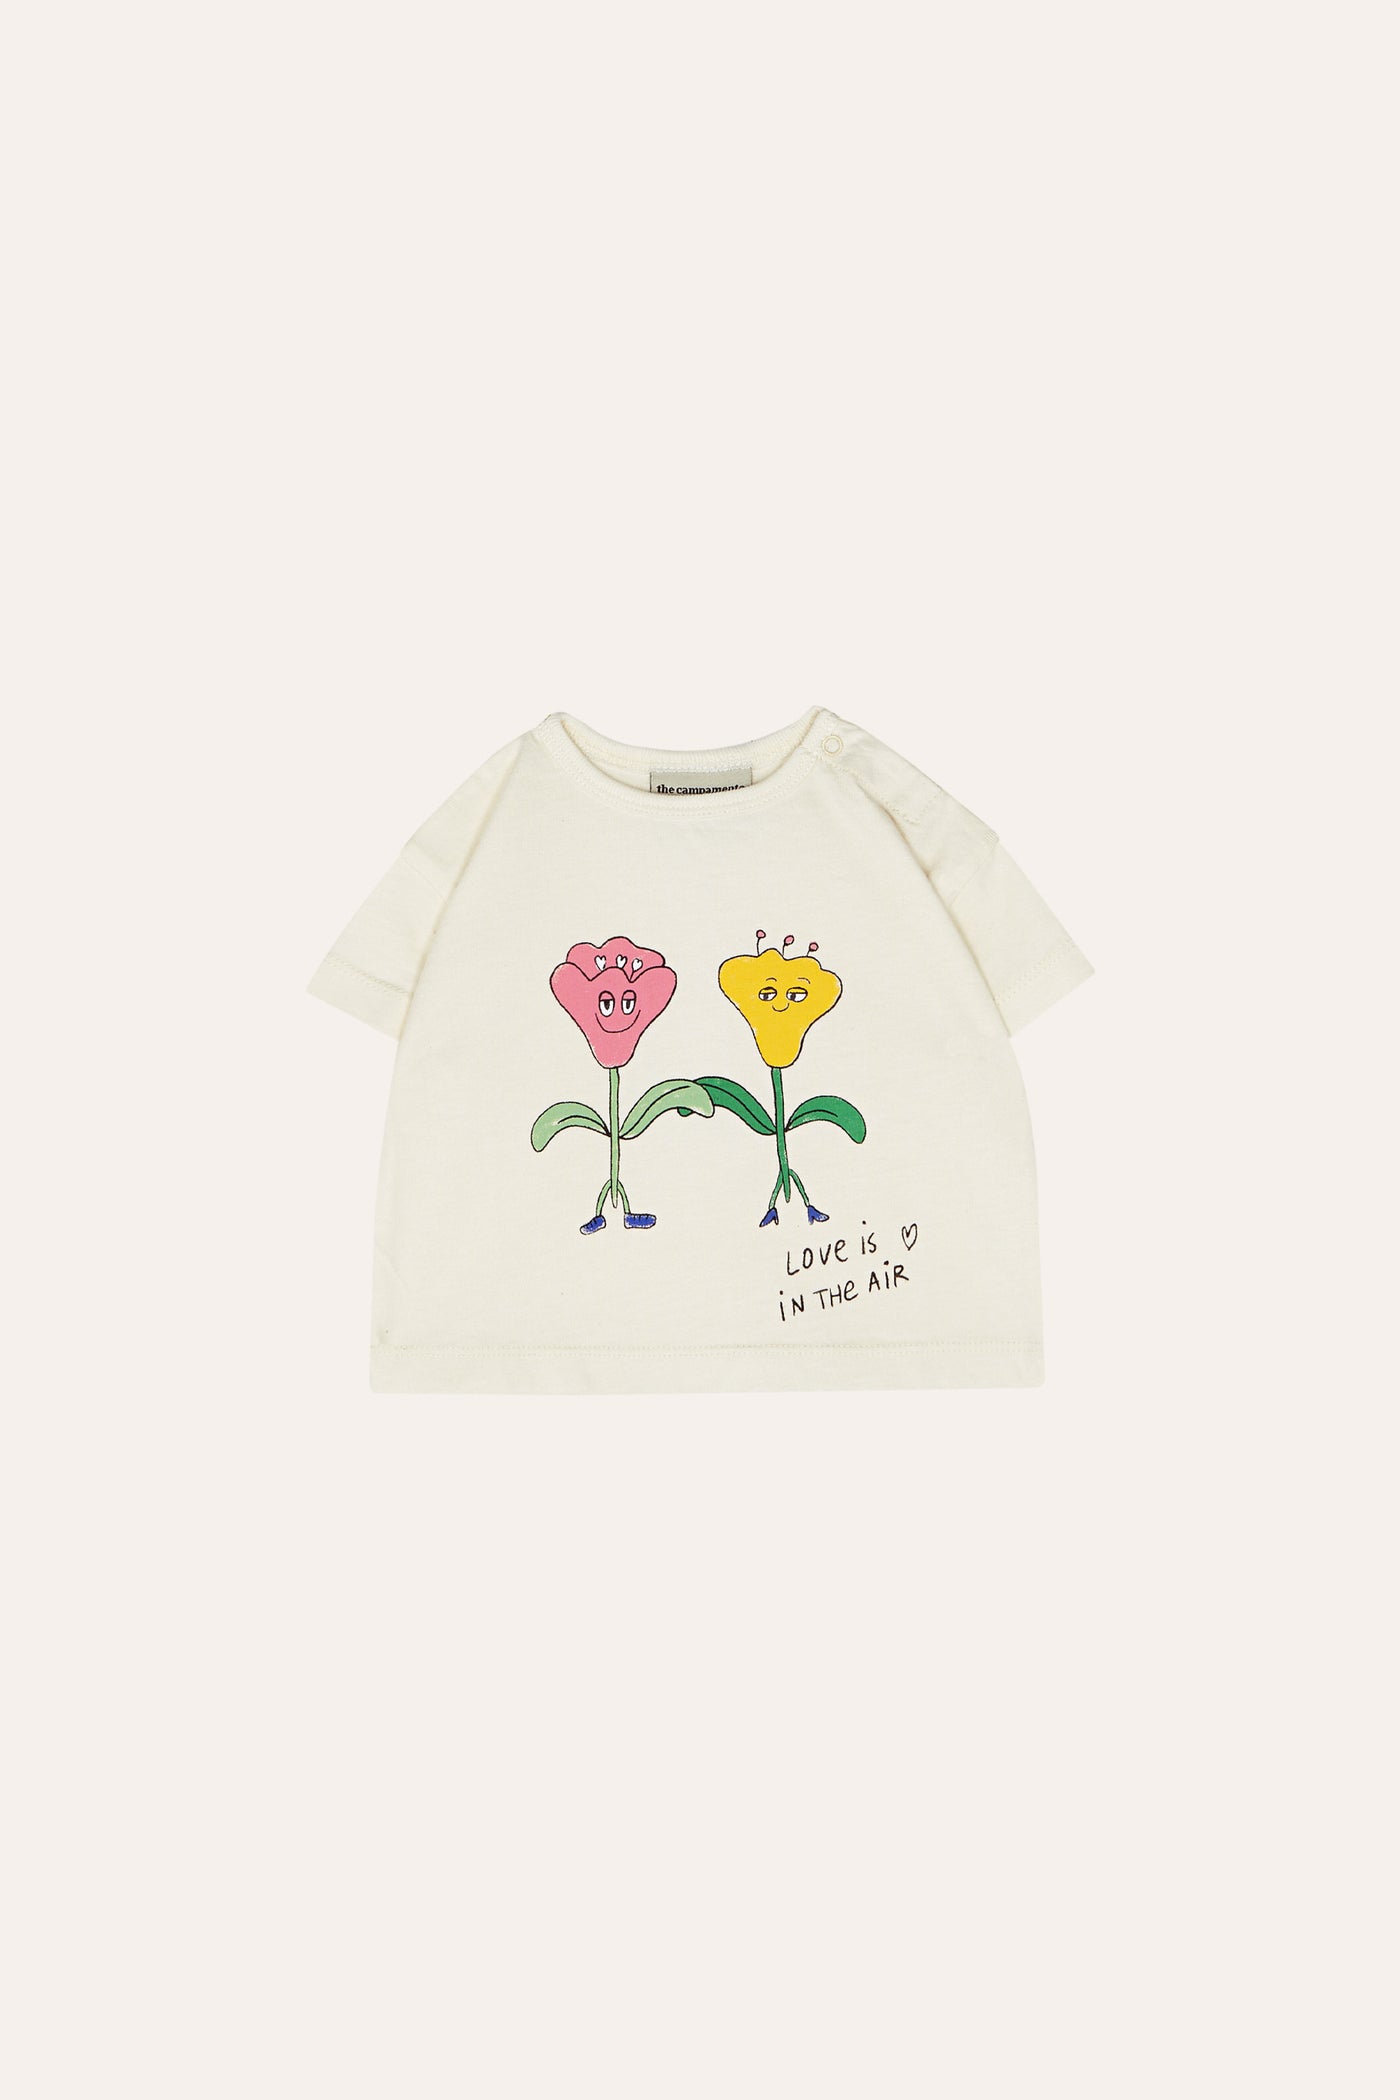 The Campamento Love is in the Air Baby T-shirt